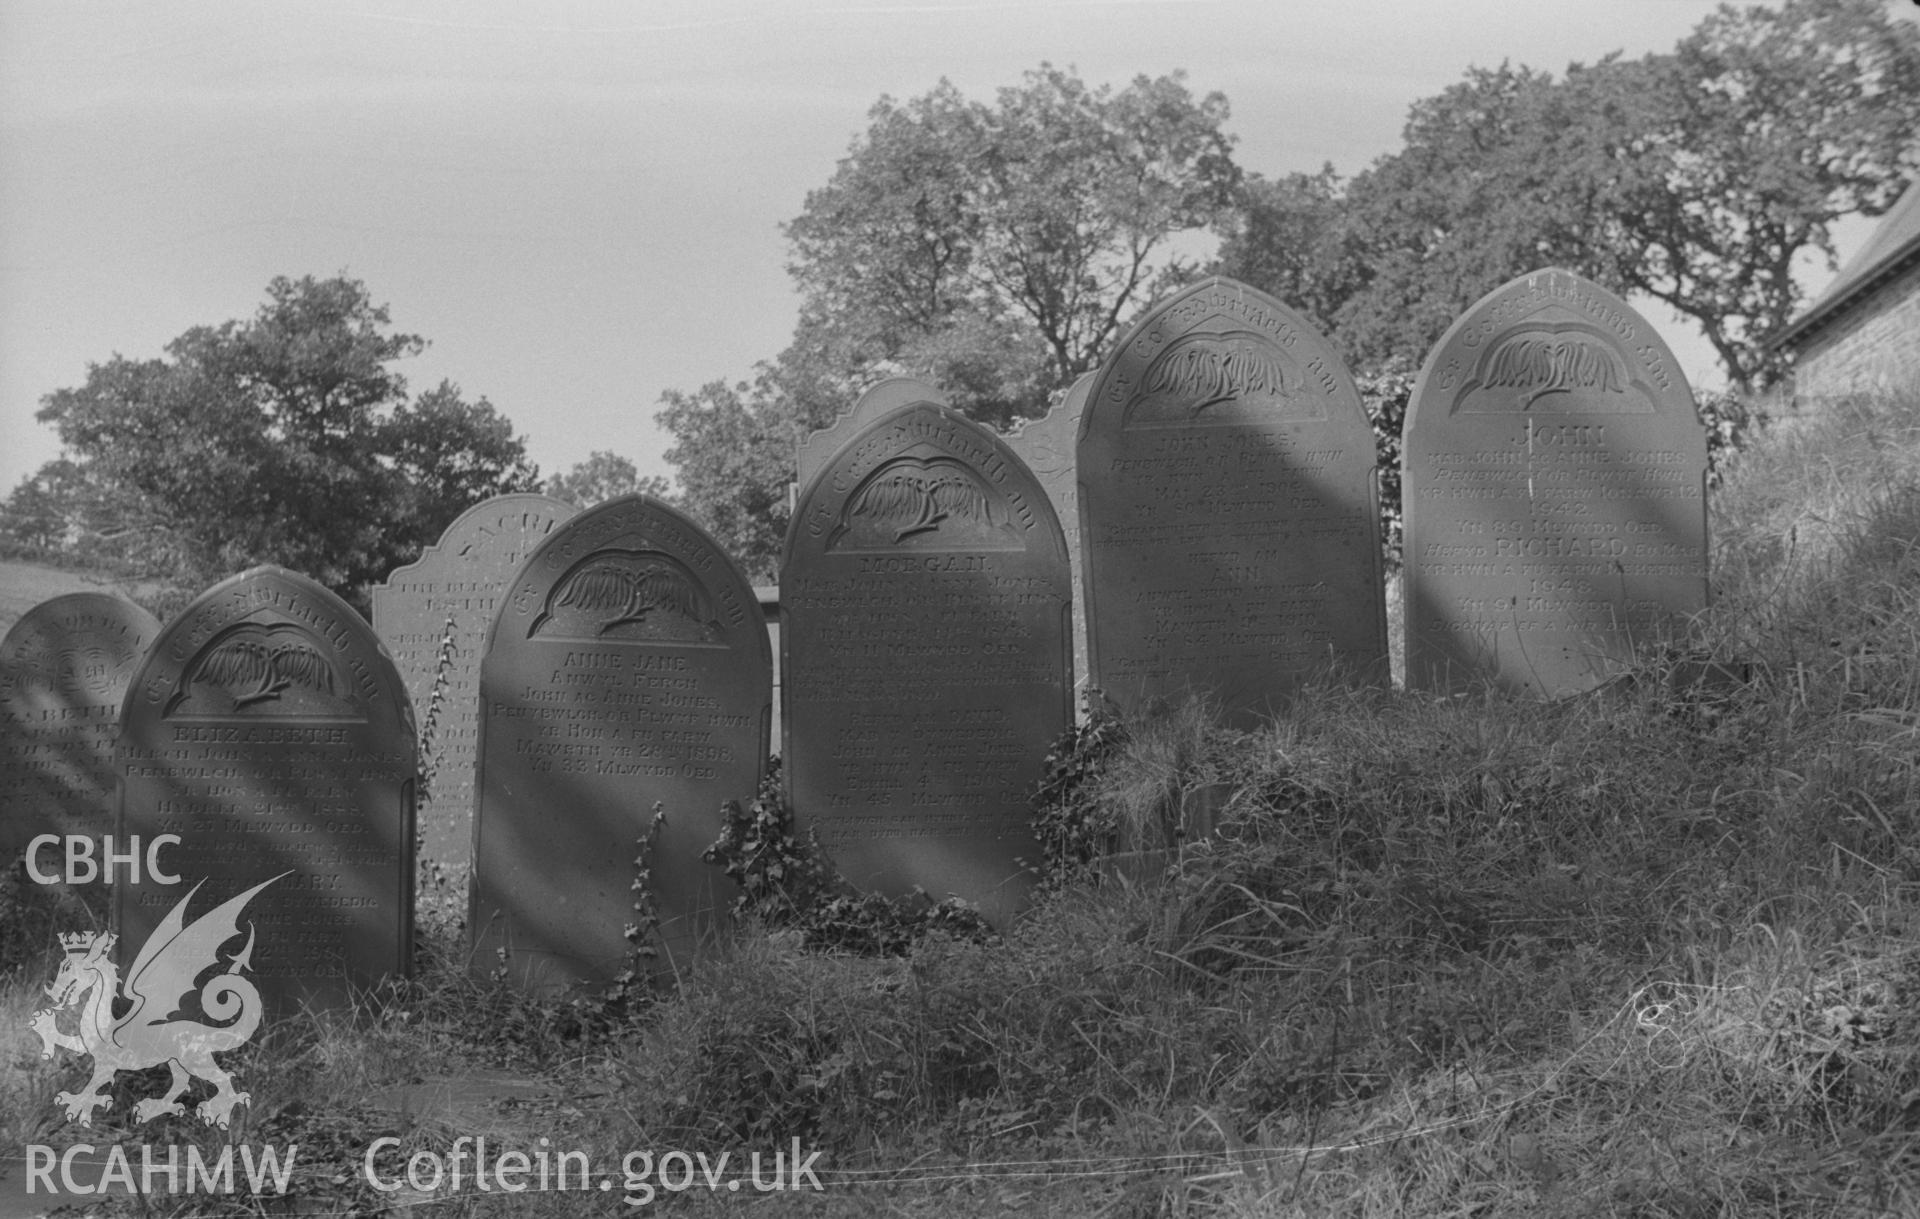 Digital copy of a black and white negative showing view of gravestone in memory of the Jones family of Peneblwch or Penybwlch at St. Non's Church, Llanerchaeron. Photographed by Arthur O. Chater in September 1966.